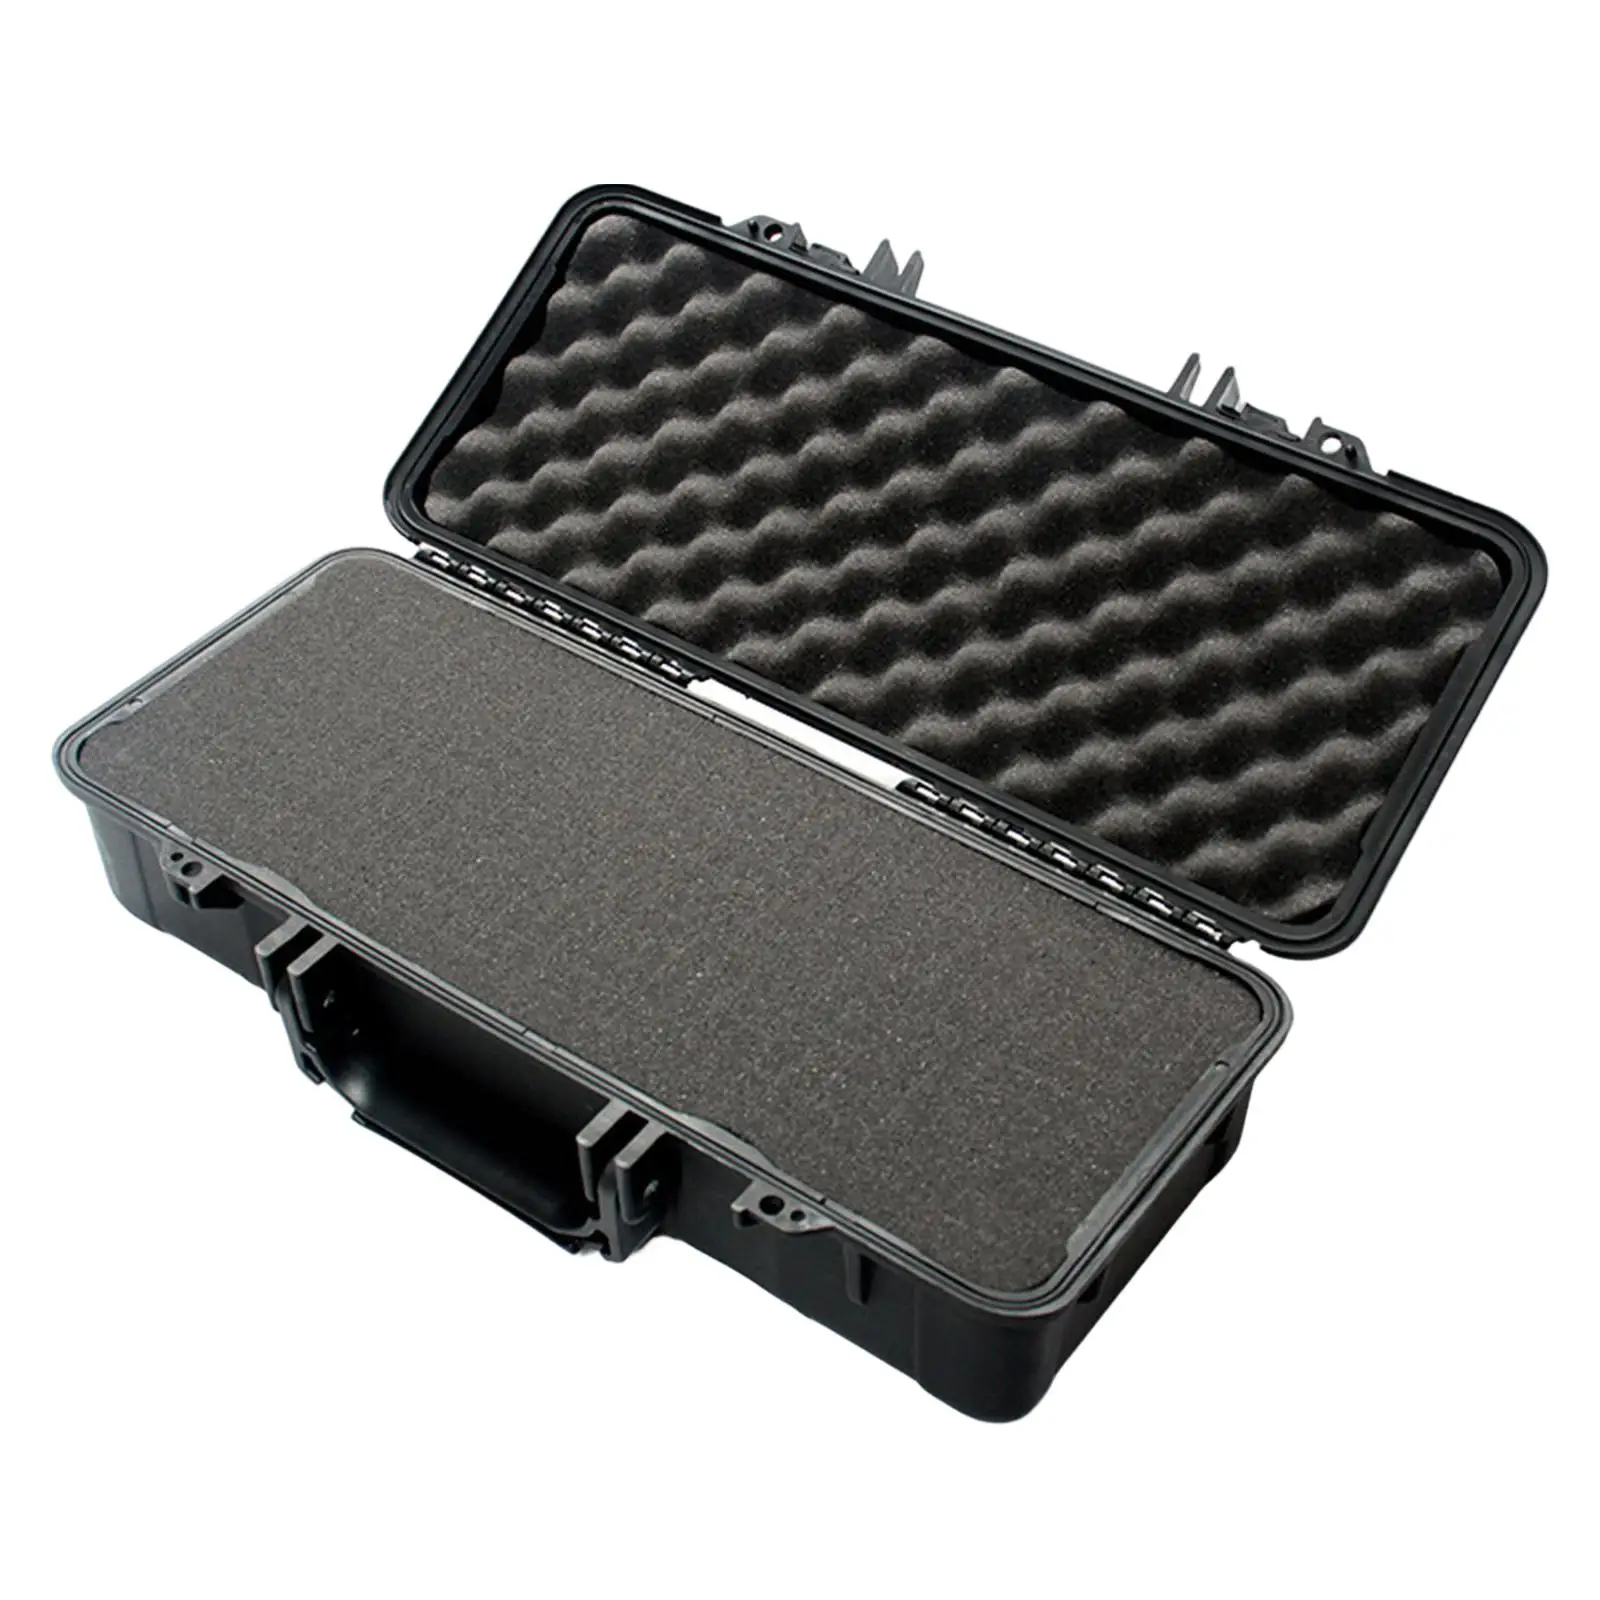 Instrument Case Impact Resistant Dustproof Safety Waterproof Portable with Pre-Cut Foam Equipment Tool Box Carrying Case